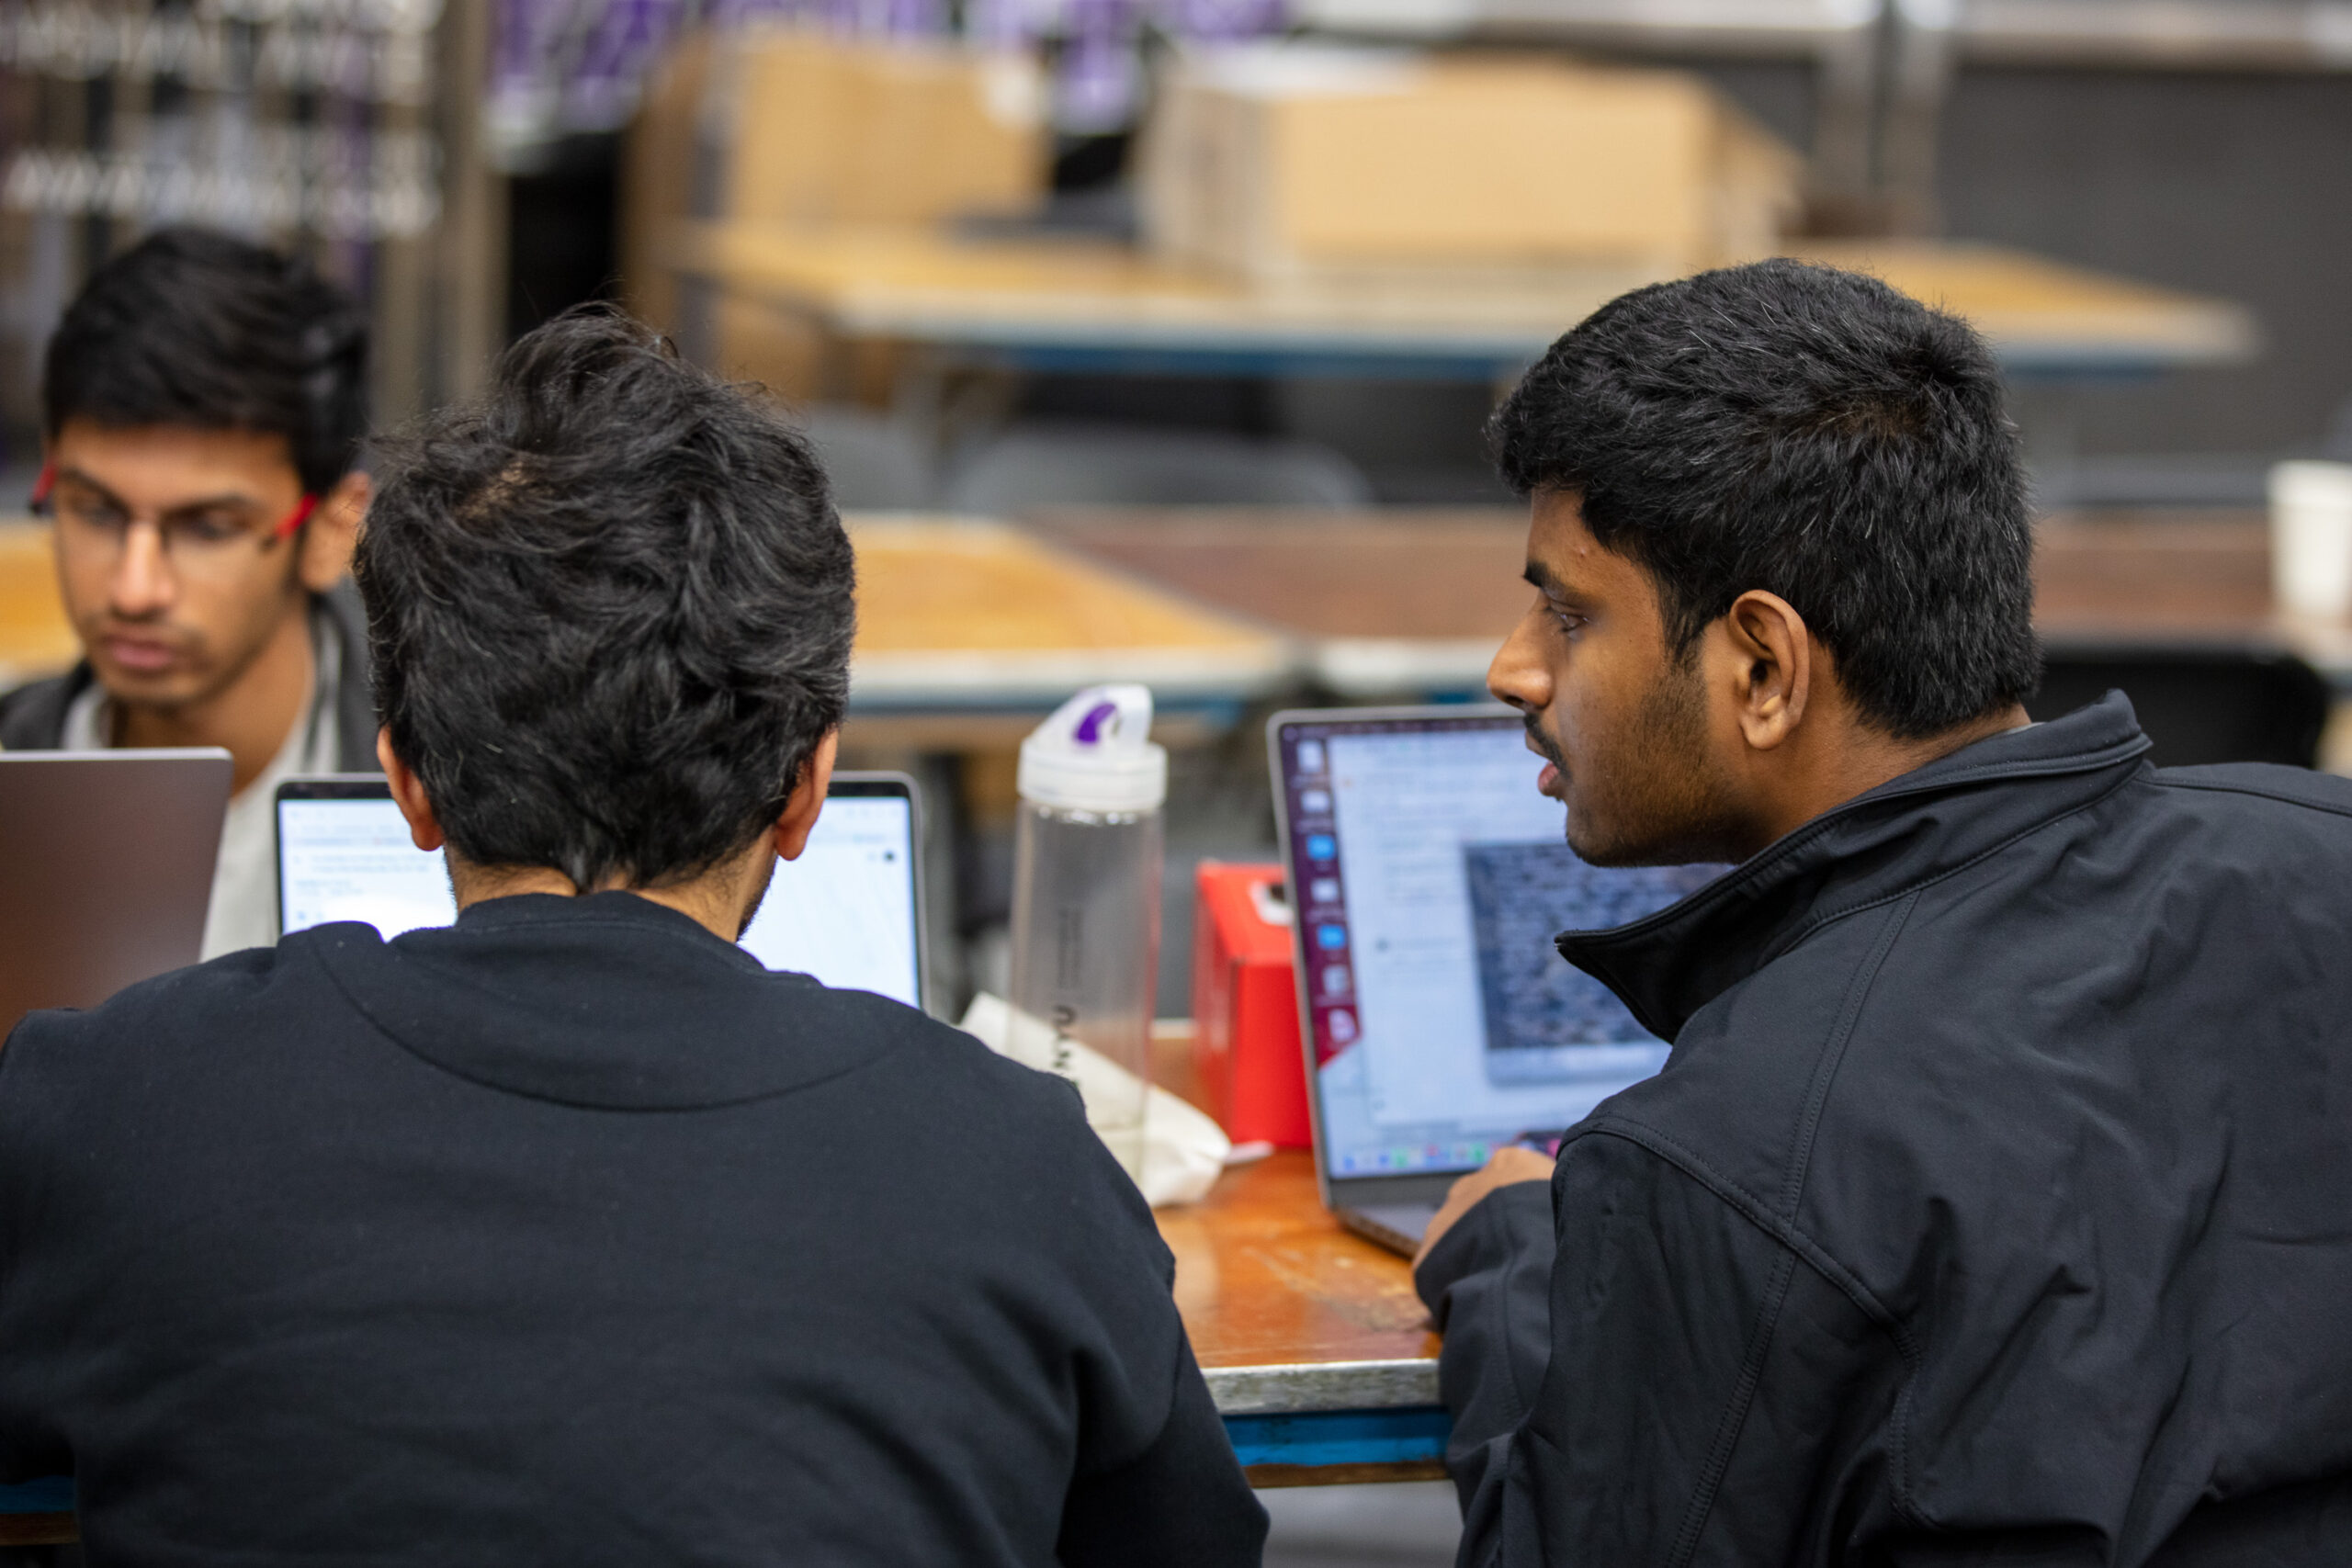 Two students working together during the NYU Hackathon event.